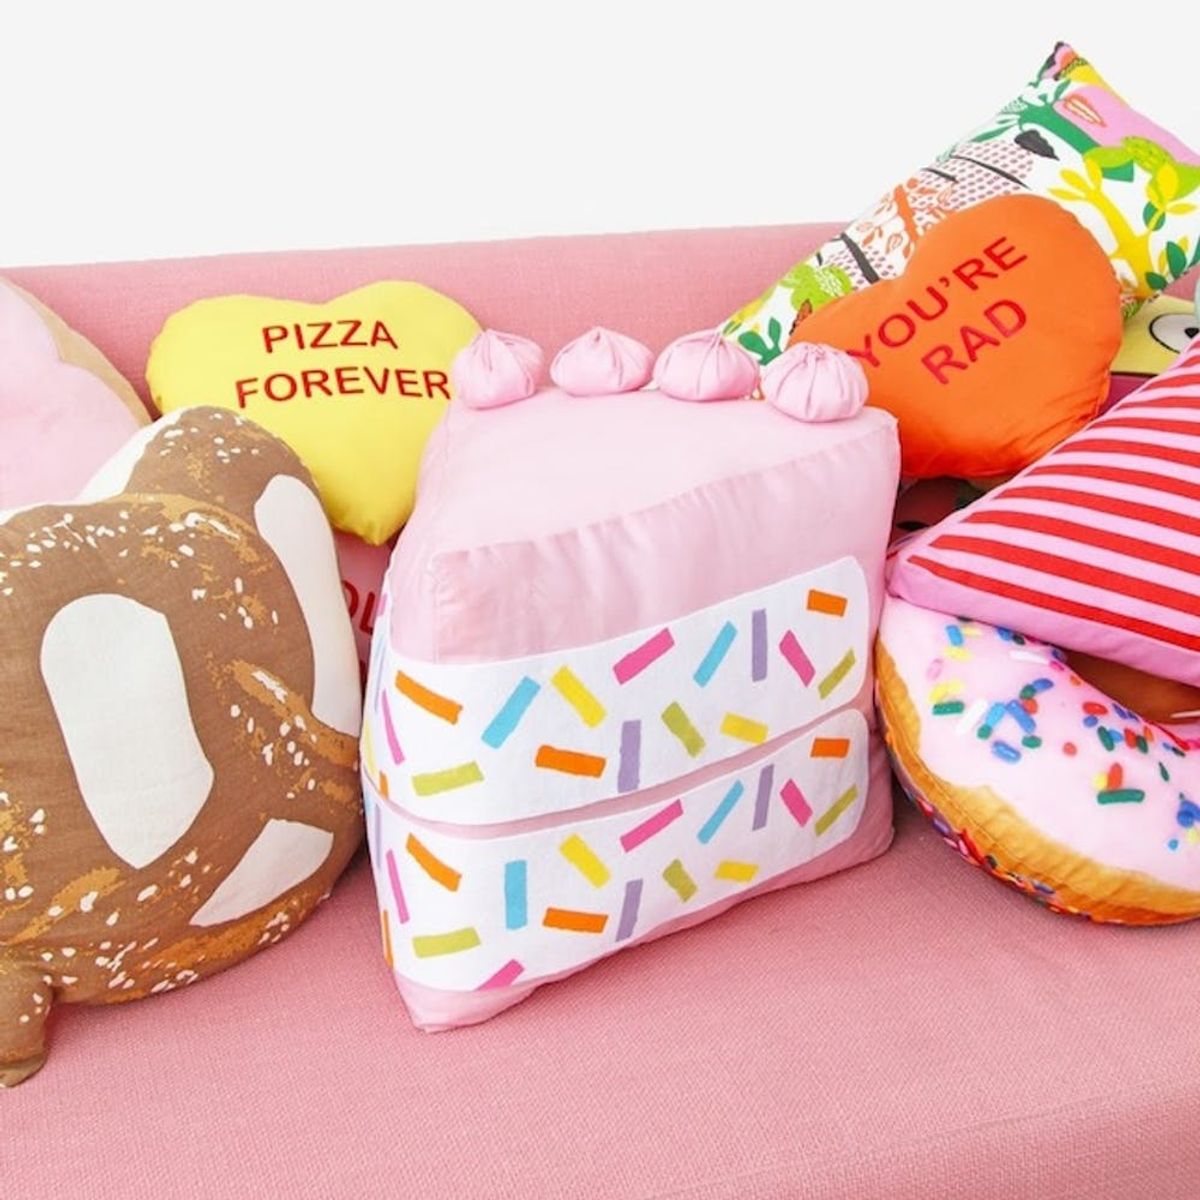 diy pillows that are fun shapes